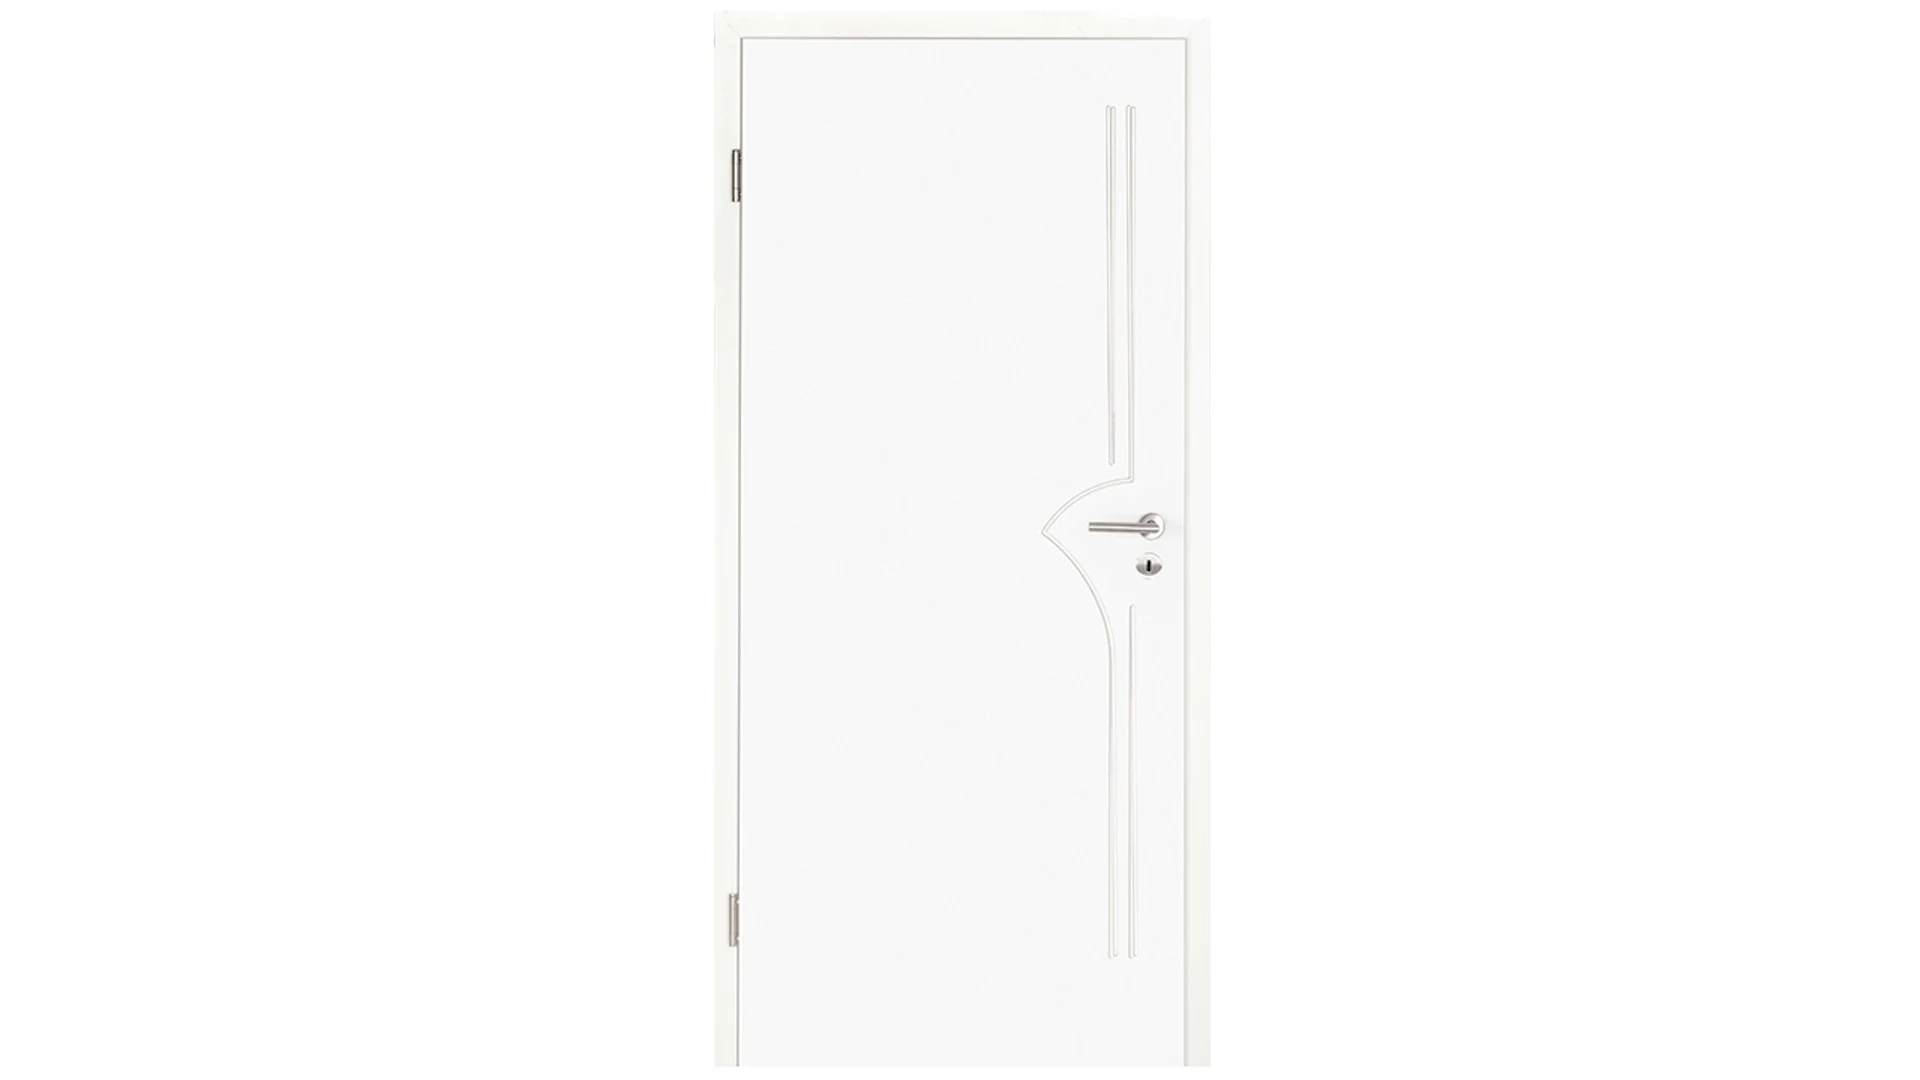 planeo interior door lacquer 2.0 - Kalle 9016 white lacquer 1985 x 985 mm DIN L - round RSP hinge 3-t